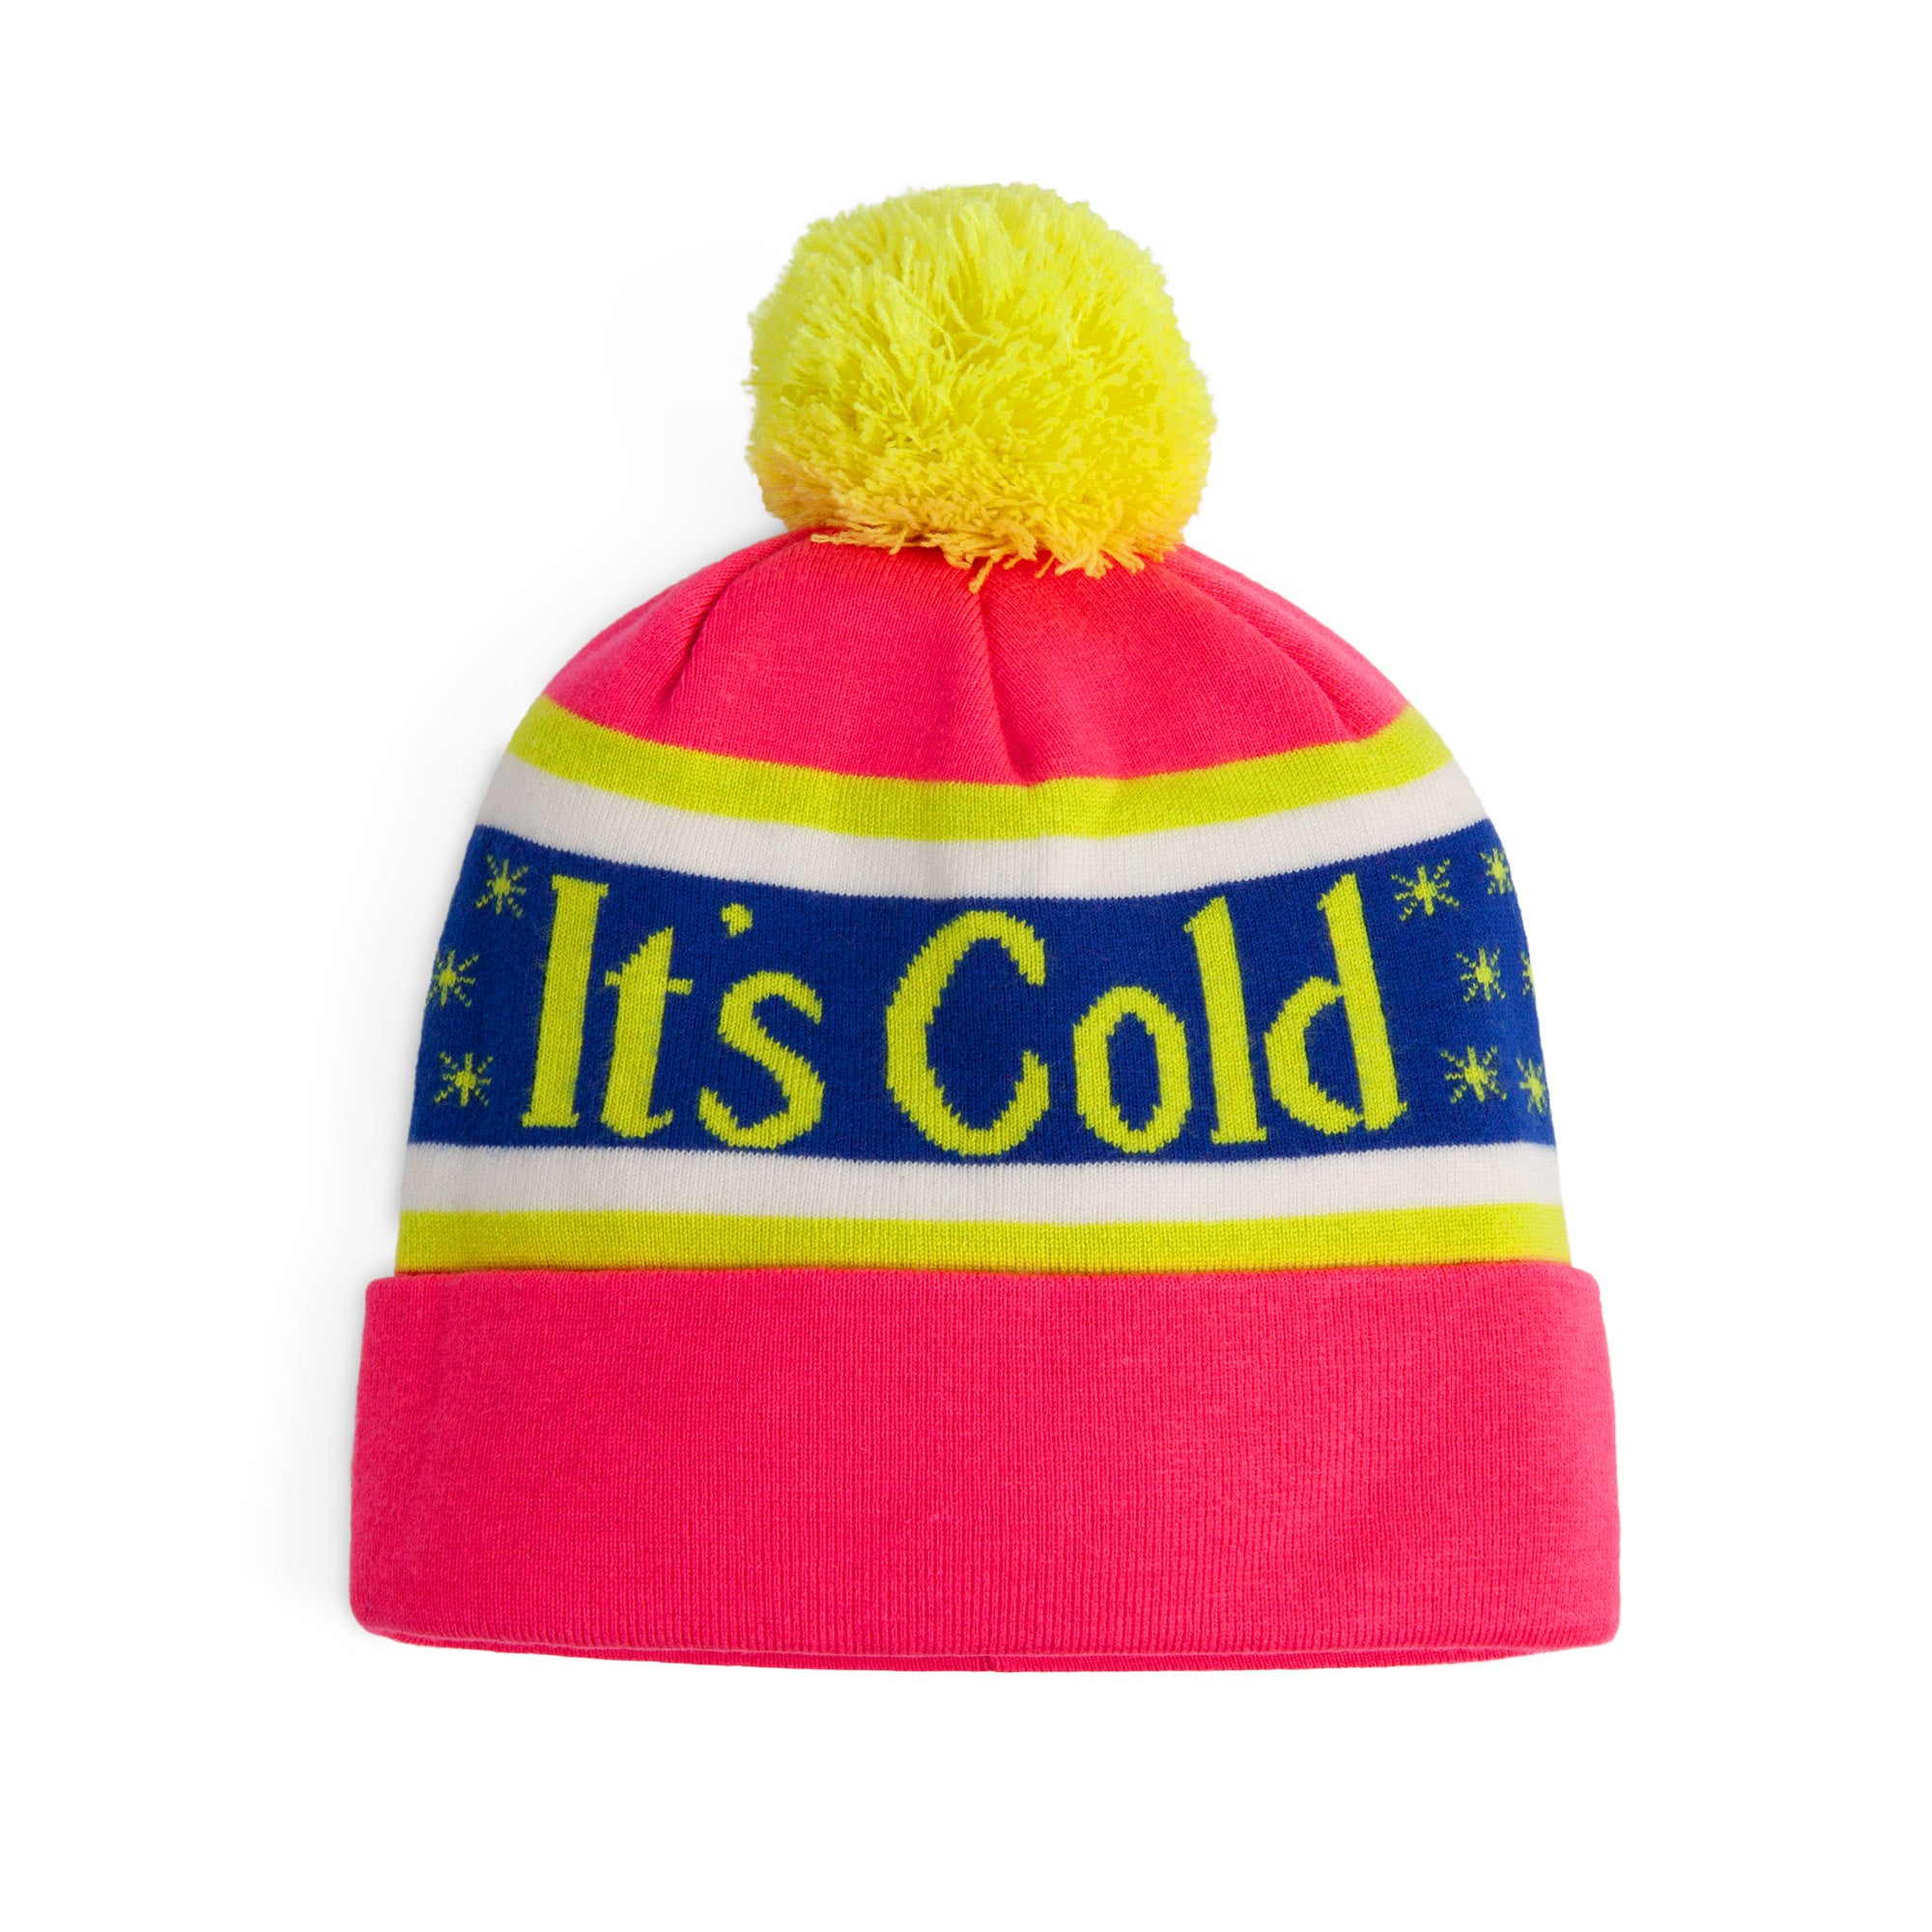 Women’s Hats, Women’s Beanie Hats, Winter Hats,  Comfortable, Cold Lady, Winter, Cold Weather